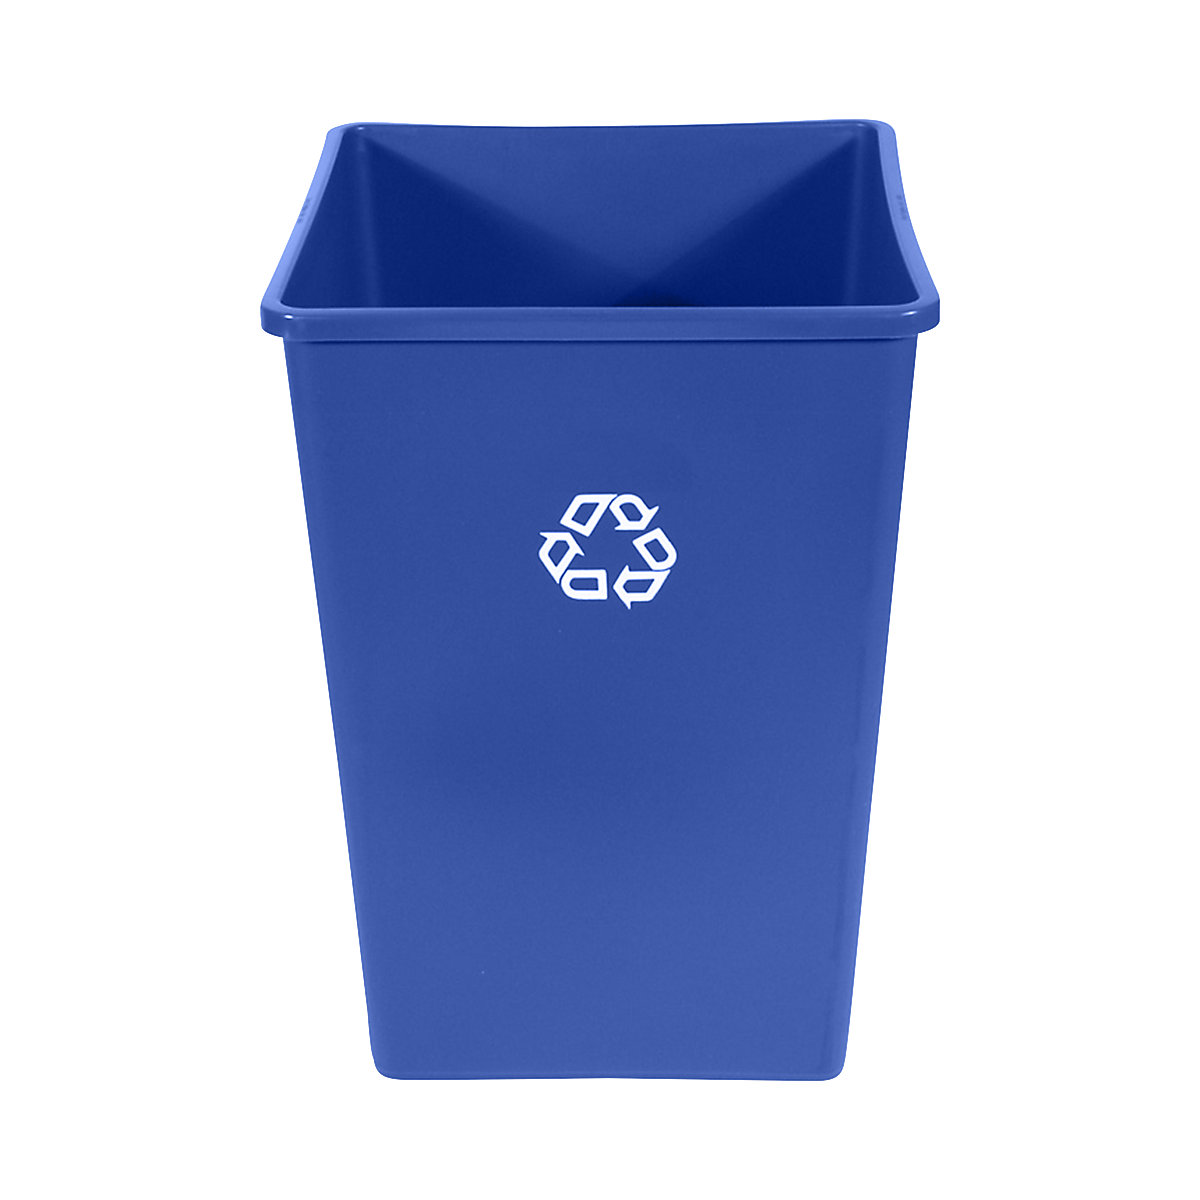 UNTOUCHABLE® recyclable waste container - Rubbermaid